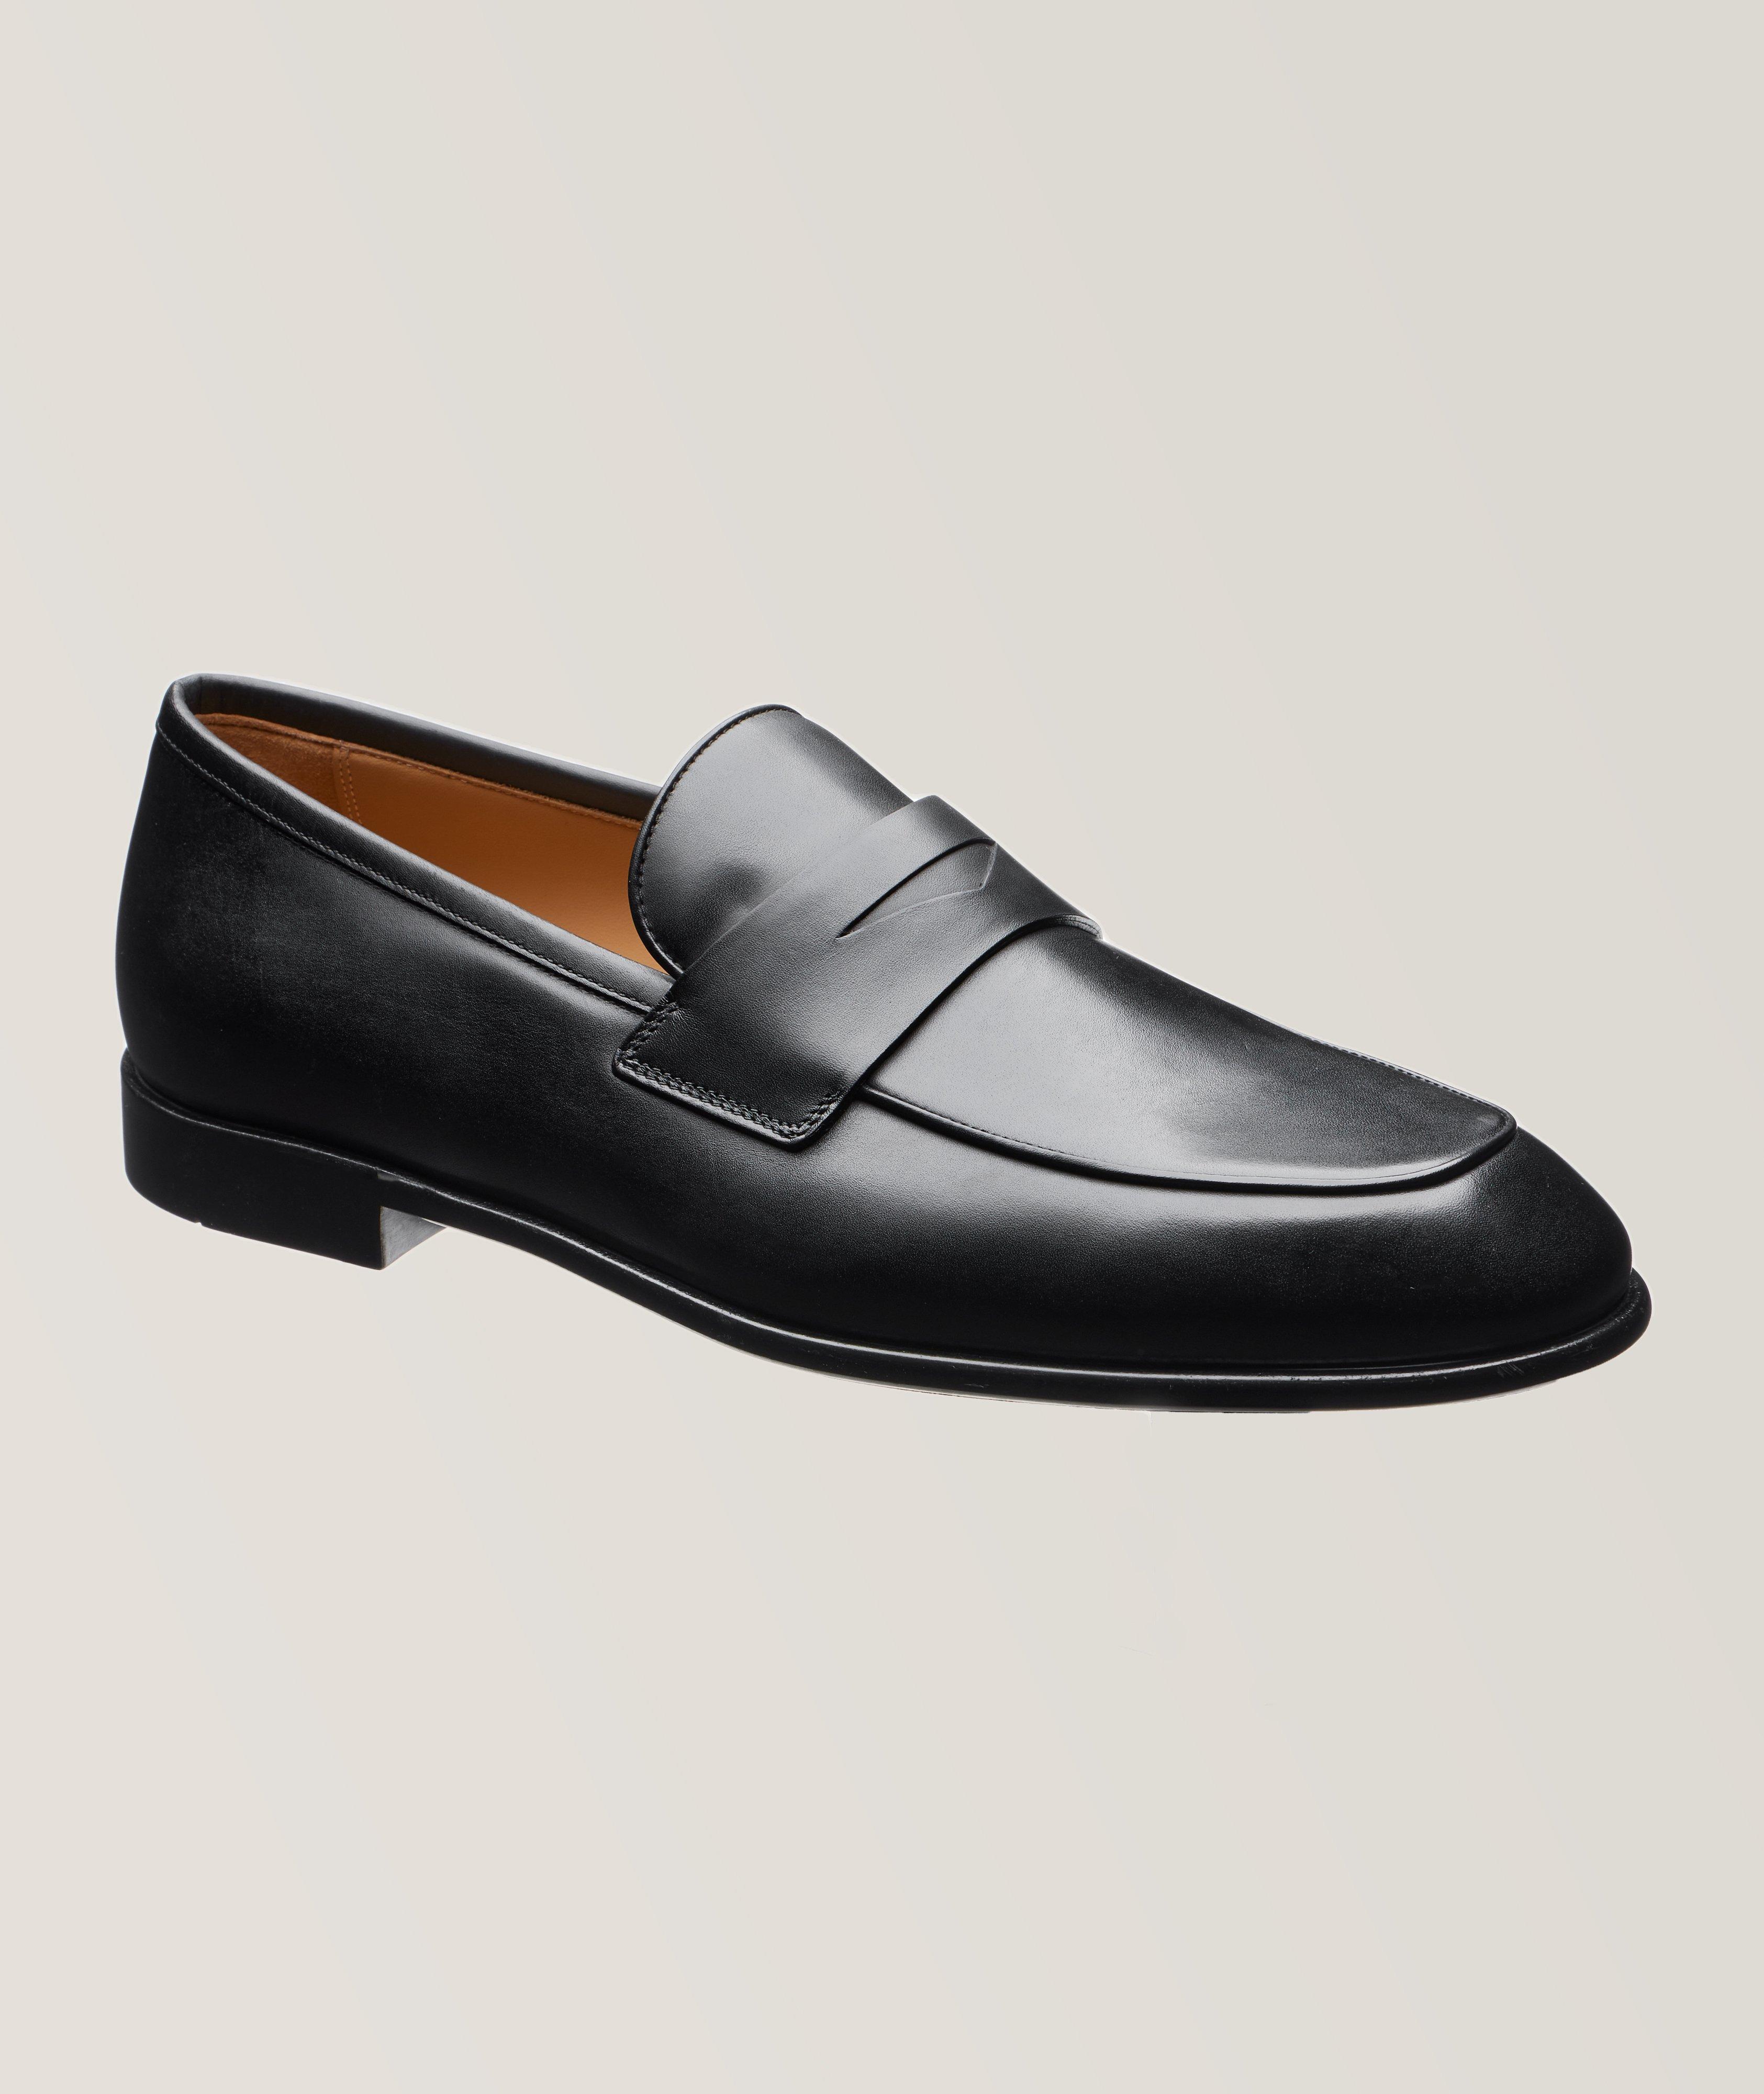 Funes Penny Loafers image 0